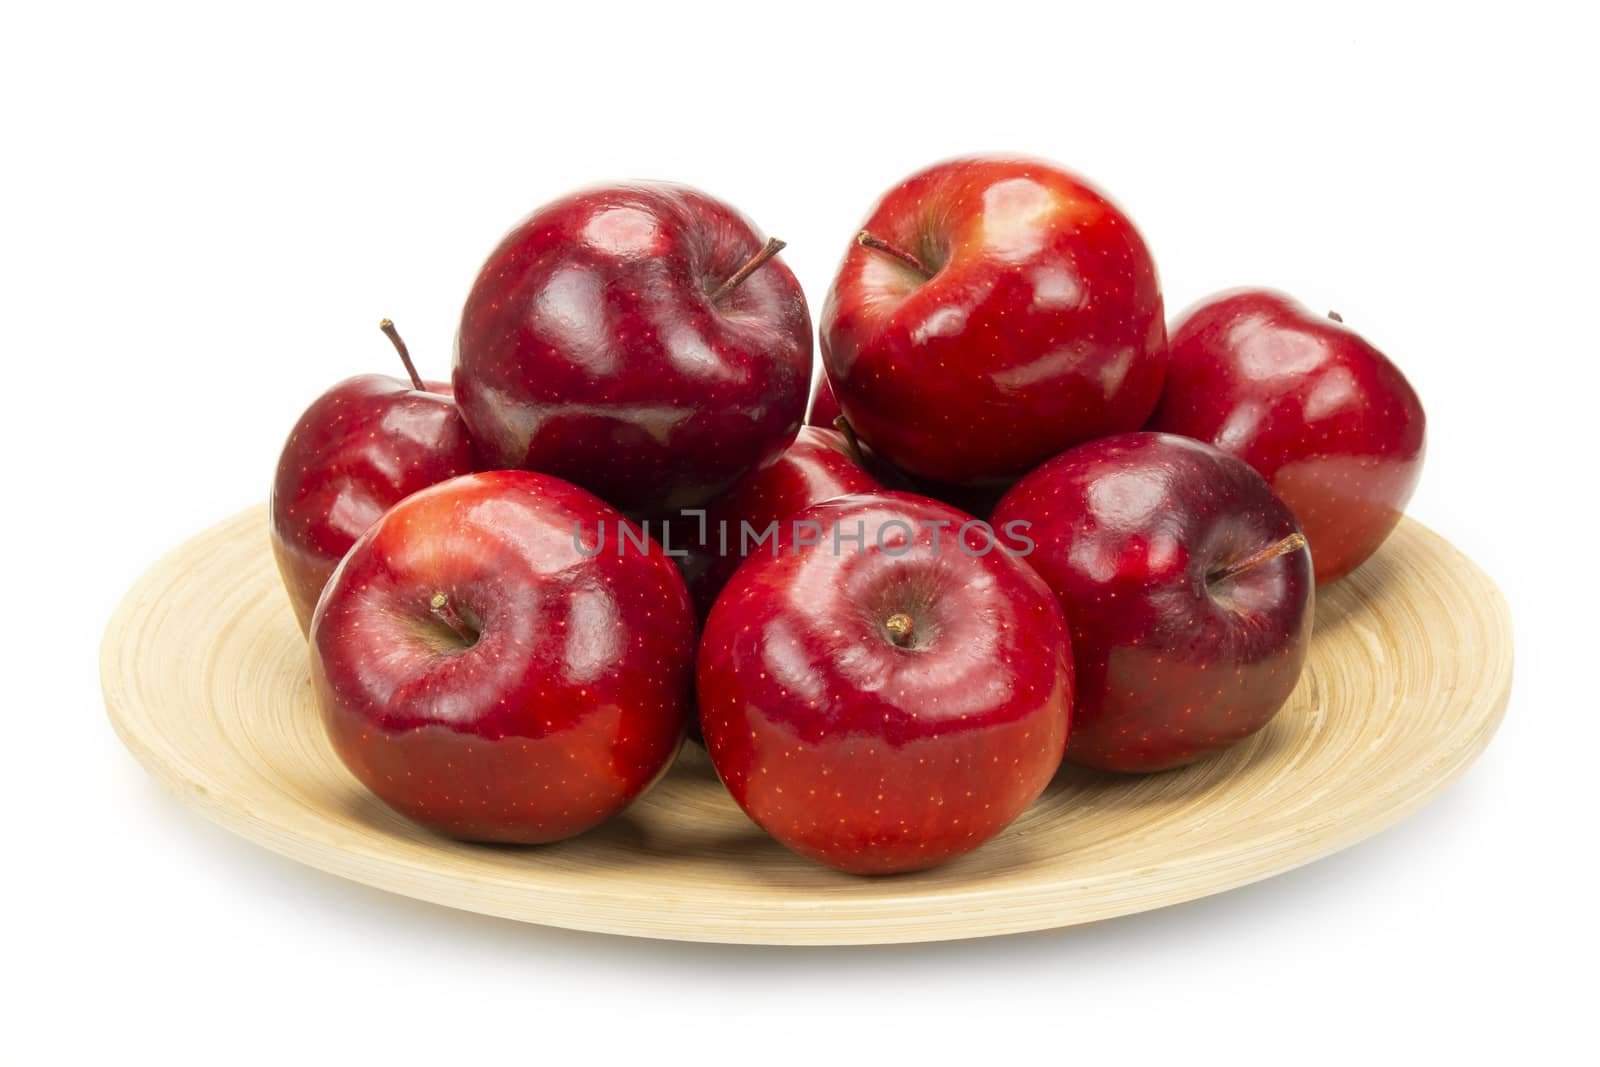 A bunch of fresh red apples on a bamboo plate, isolated on white background.